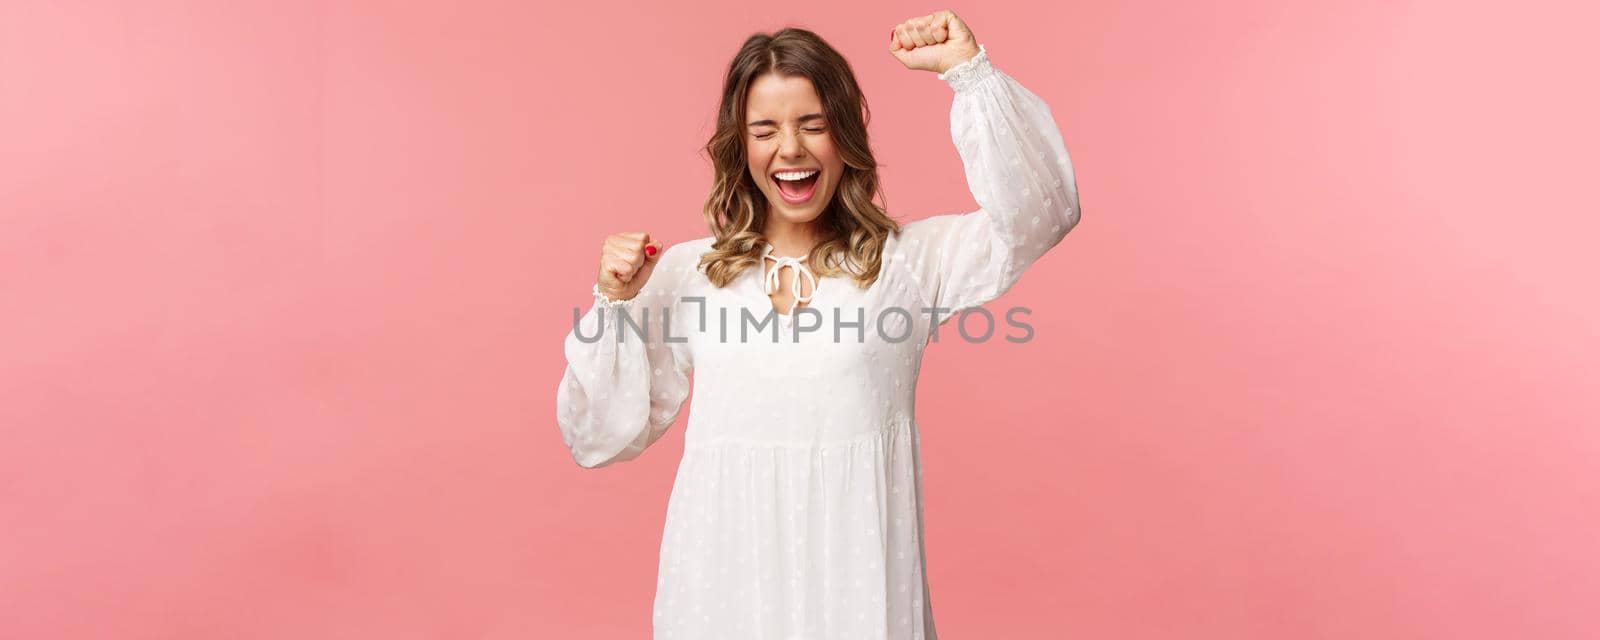 Portrait of beautiful tender young blond girl in white dress, raising hands up in hooray, yes or victory, shouting relieved, scream from happiness, triumphing, winning prize, become champion.